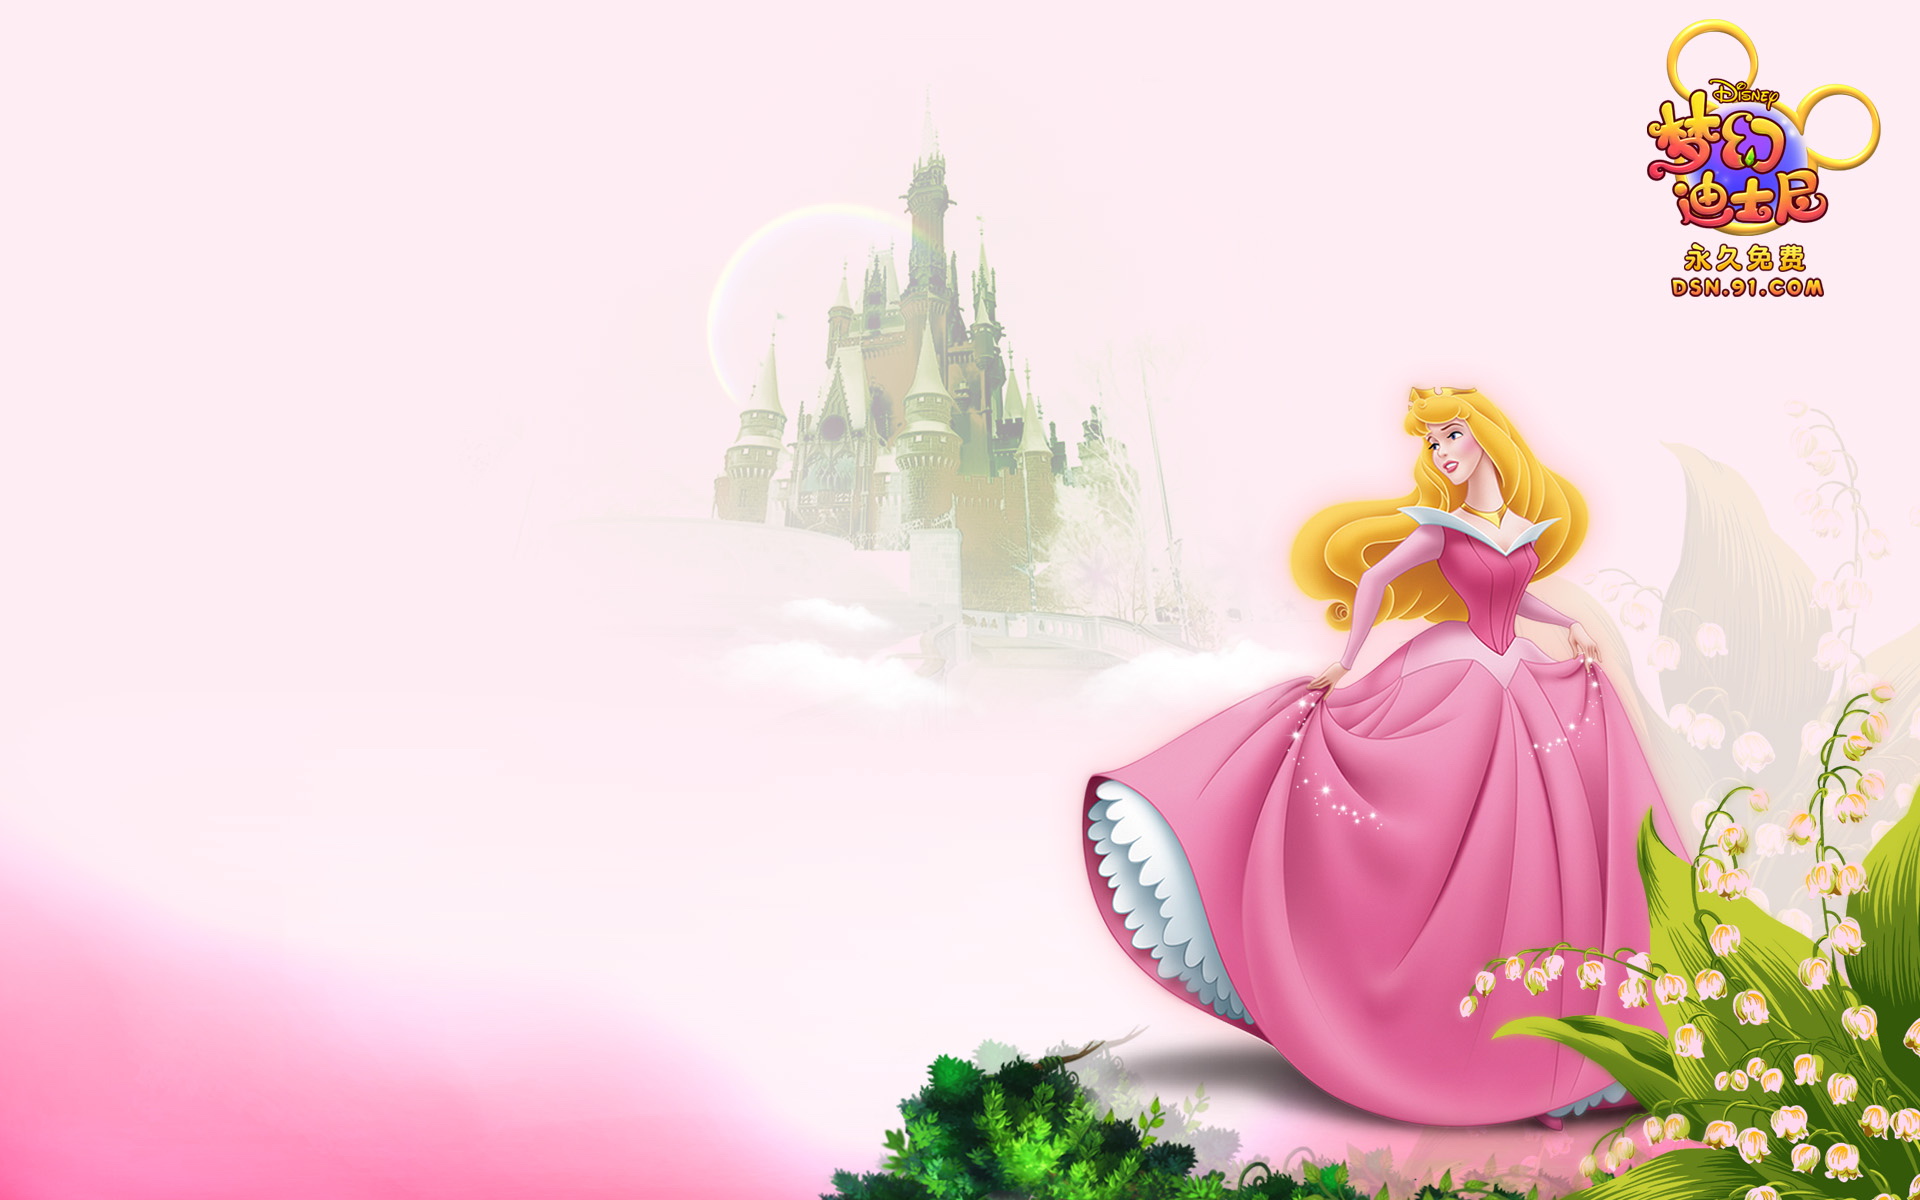 Free download Disney Princesses Sleeping Beauty wallpapers HD free 370001  [1920x1200] for your Desktop, Mobile & Tablet | Explore 78+ Sleeping Beauty  Wallpaper Disney Princess | Disney Princess Wallpaper, Disney Princess  Wallpapers, Sleeping Beauty ...